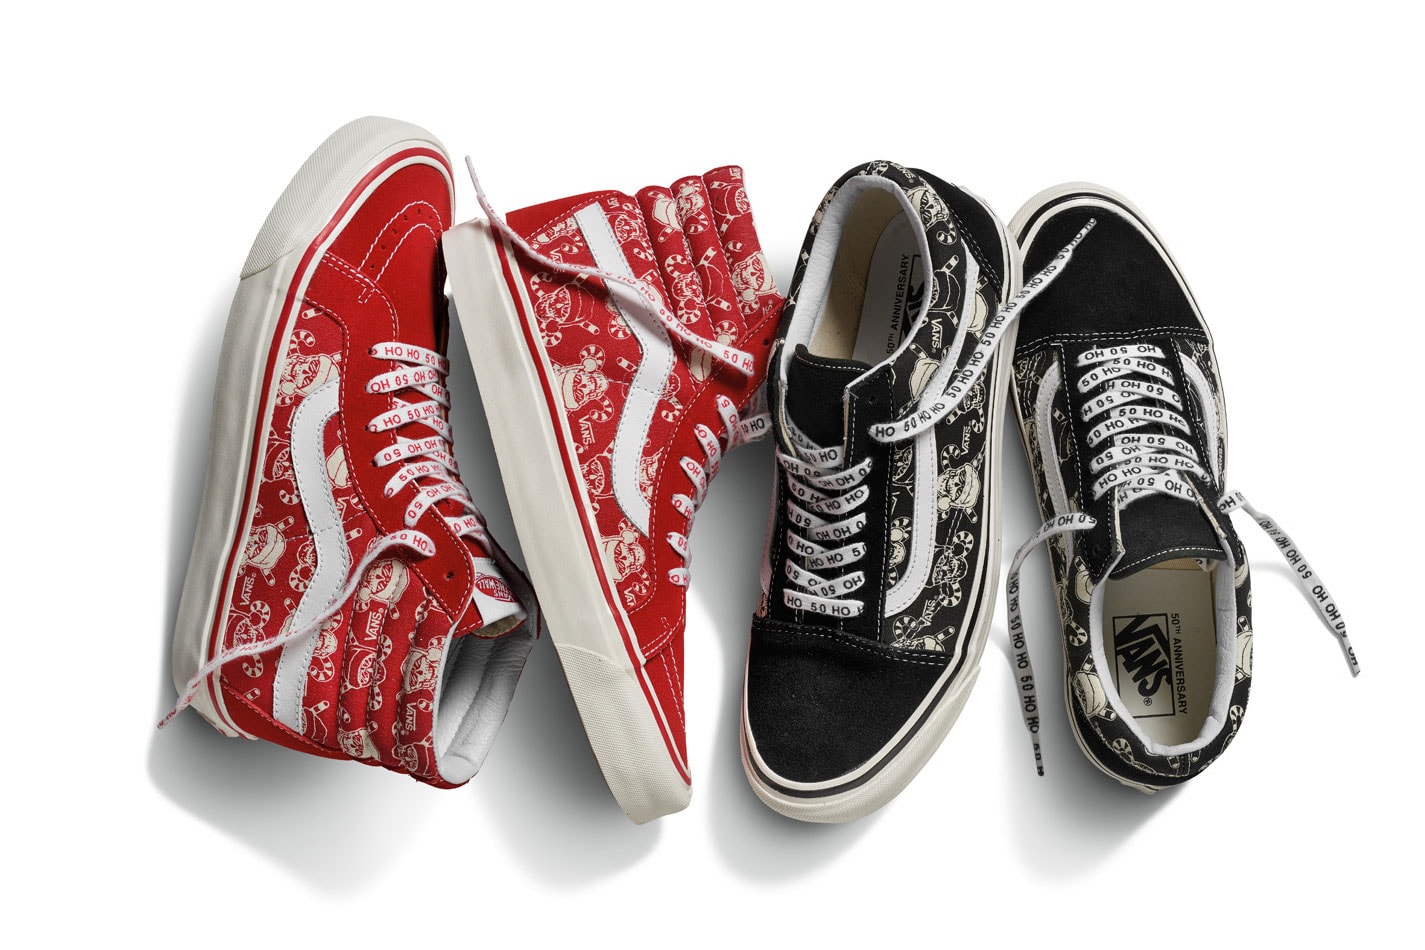 Vans 2016 Holiday Collection Sk8-Hi and Old Skool